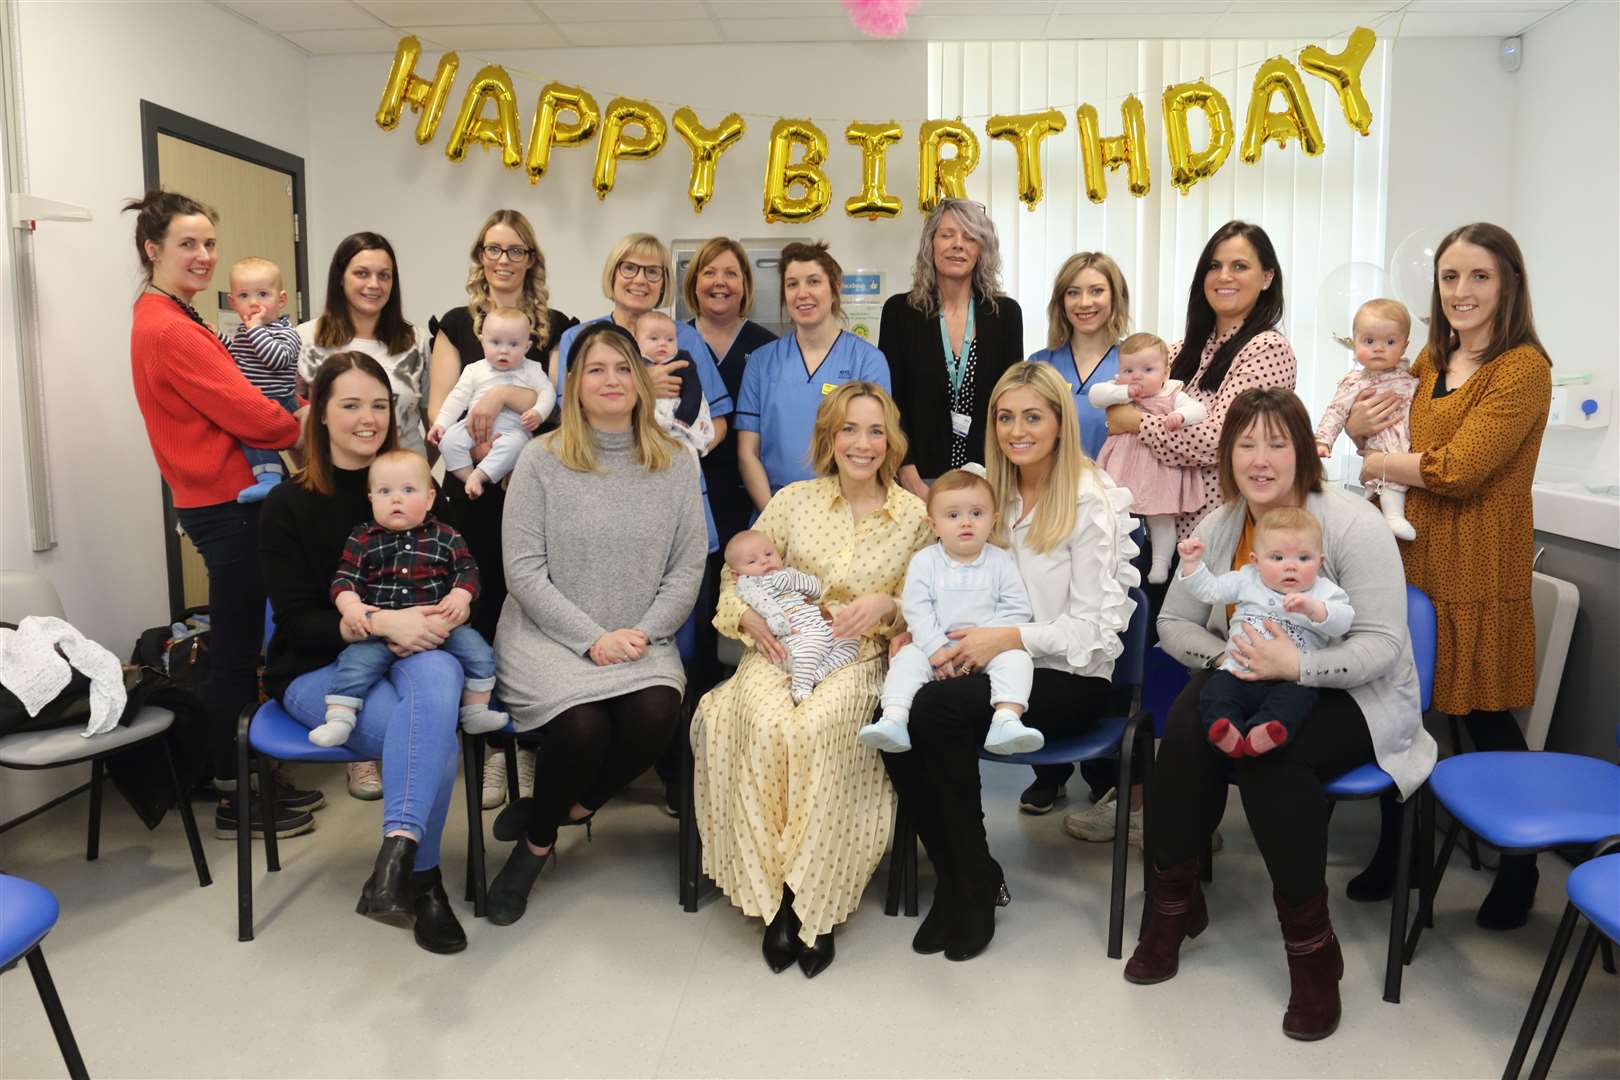 Mums and babies from year one at Inverurie Maternity Unit were joined by Call the Midwife's Laura Main to celebrate the unit's birthday.